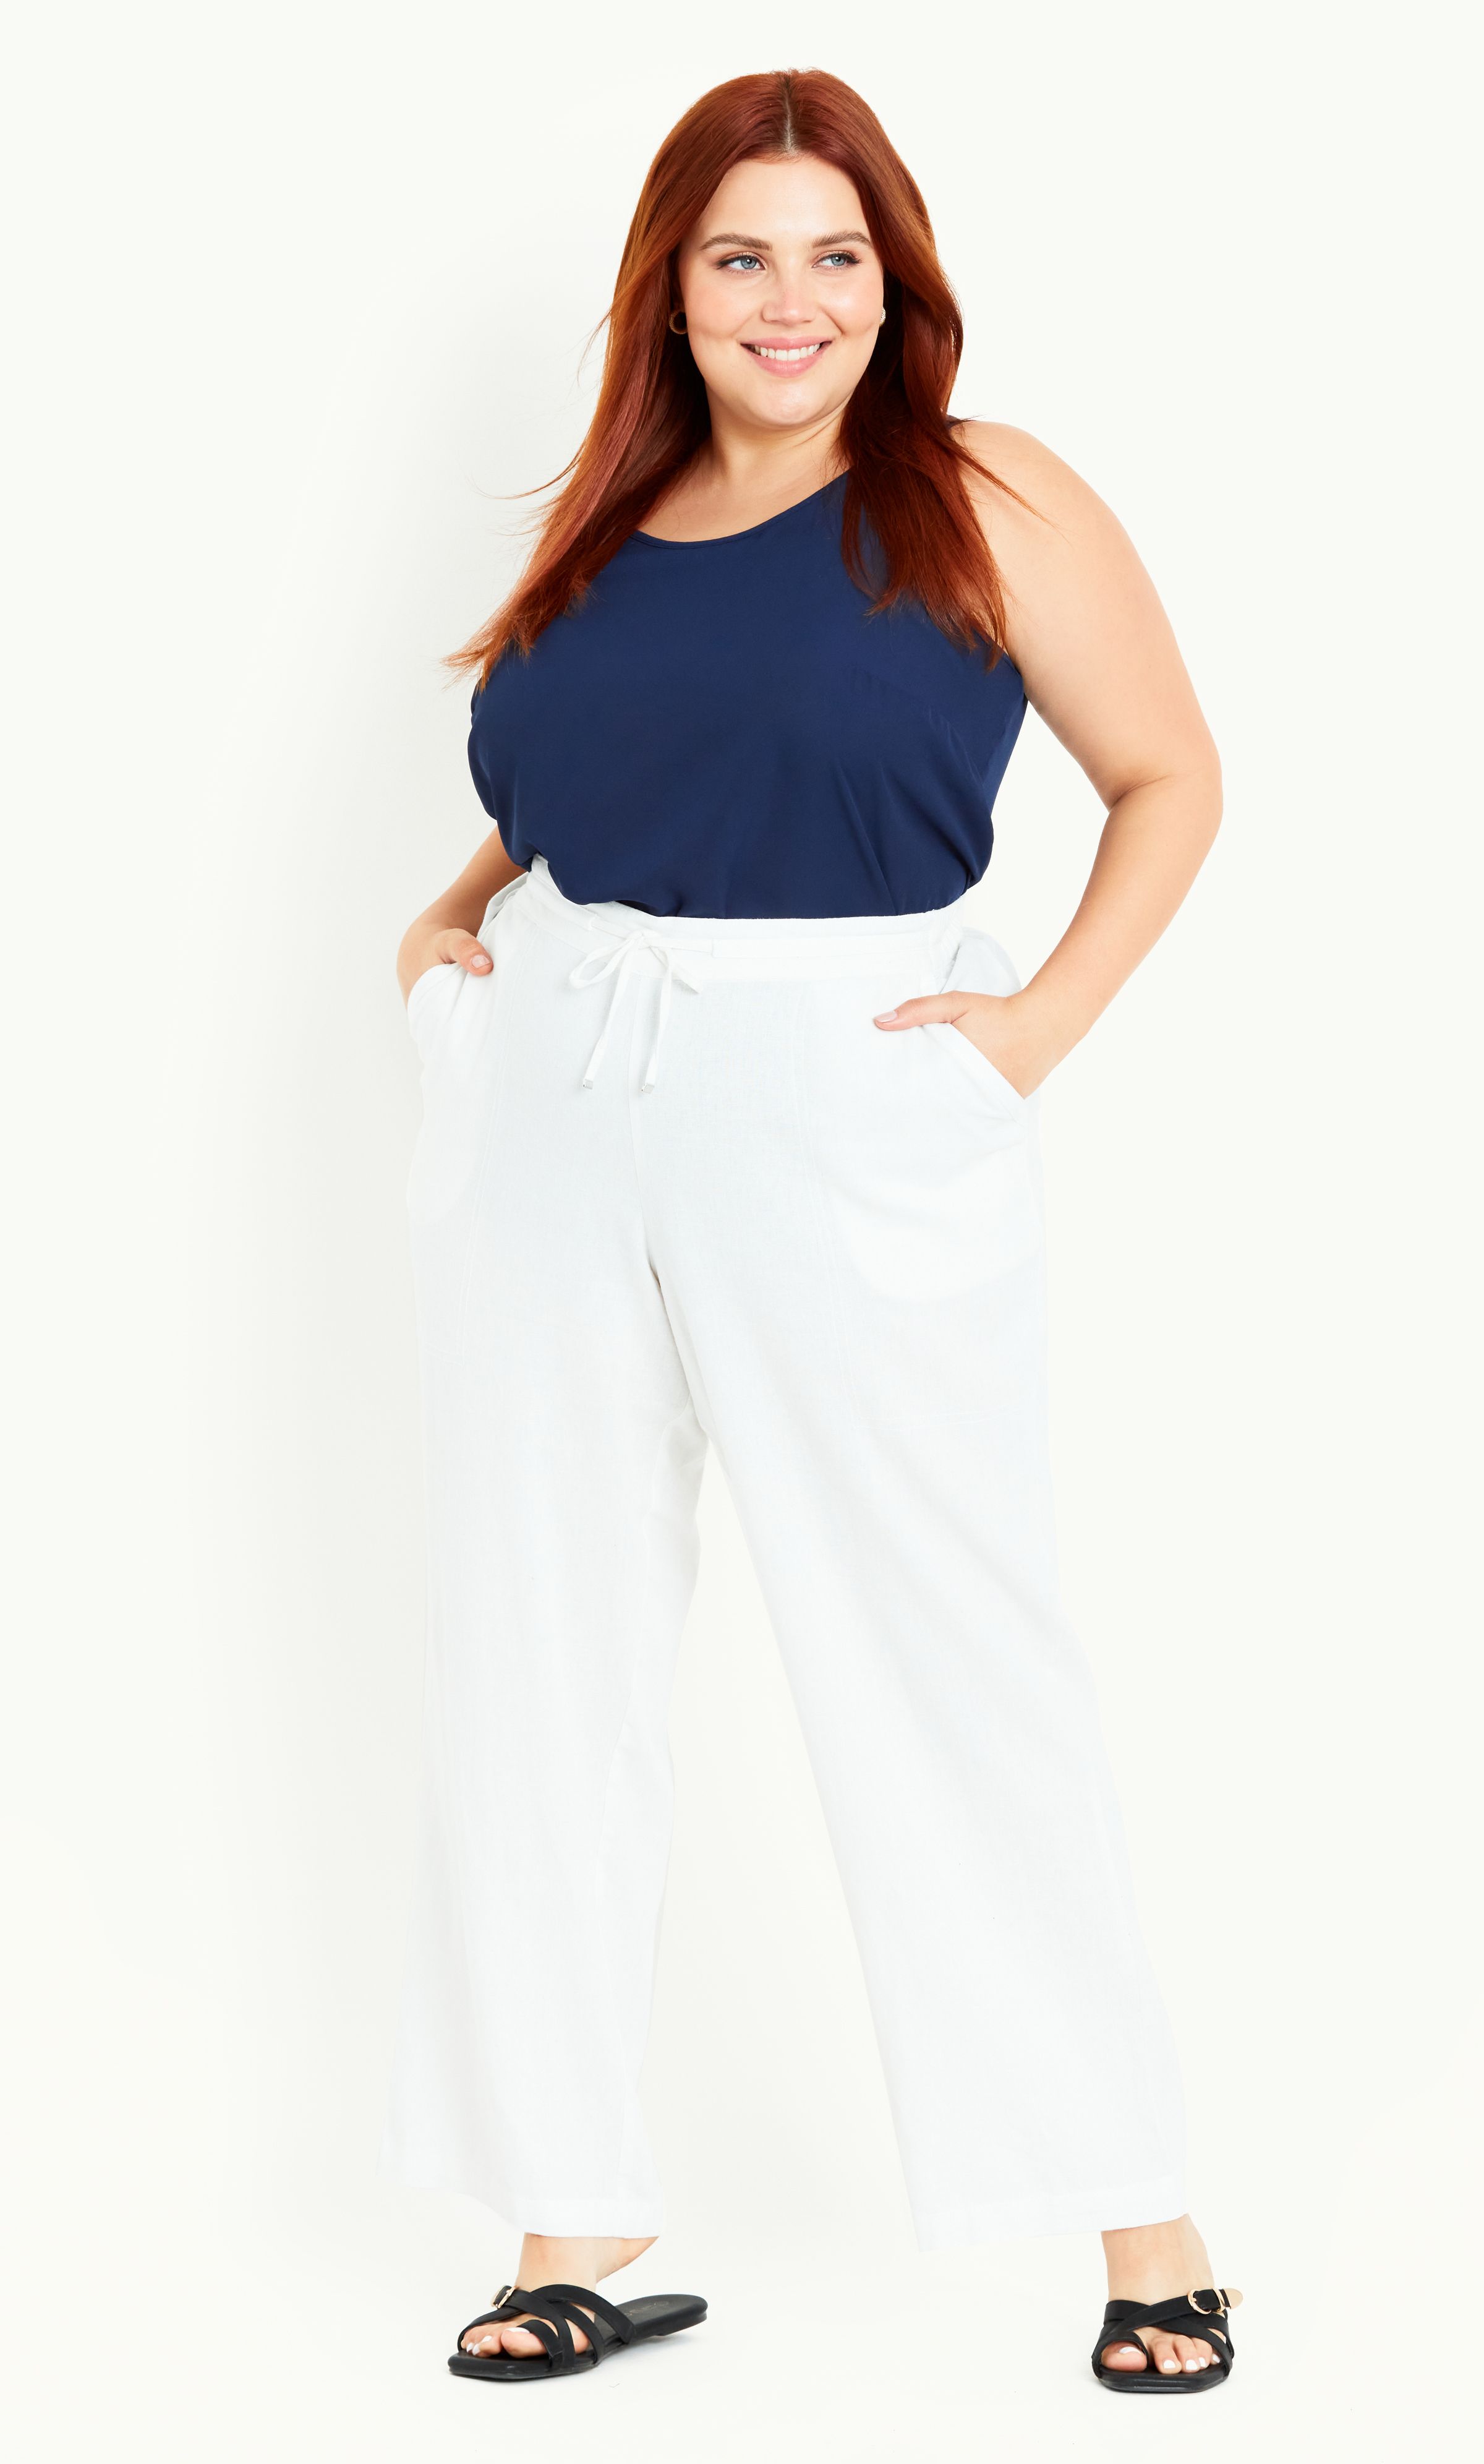 Keep your summer rotation on fleek with the oh-so breezy and versatile Relaxed Linen Blend Trouser! This stylish pair features an elasticated high waist cut, relaxed leg and convenient pockets, perfect for day-to-day wear. Key Features Include: - Elasticated waist with drawstring - Four pockets - Linen blend fabrication - Relaxed leg - Unlined - Pull up style - Ankle length Elevate your day look with a V-neck tee and some chic wedges.